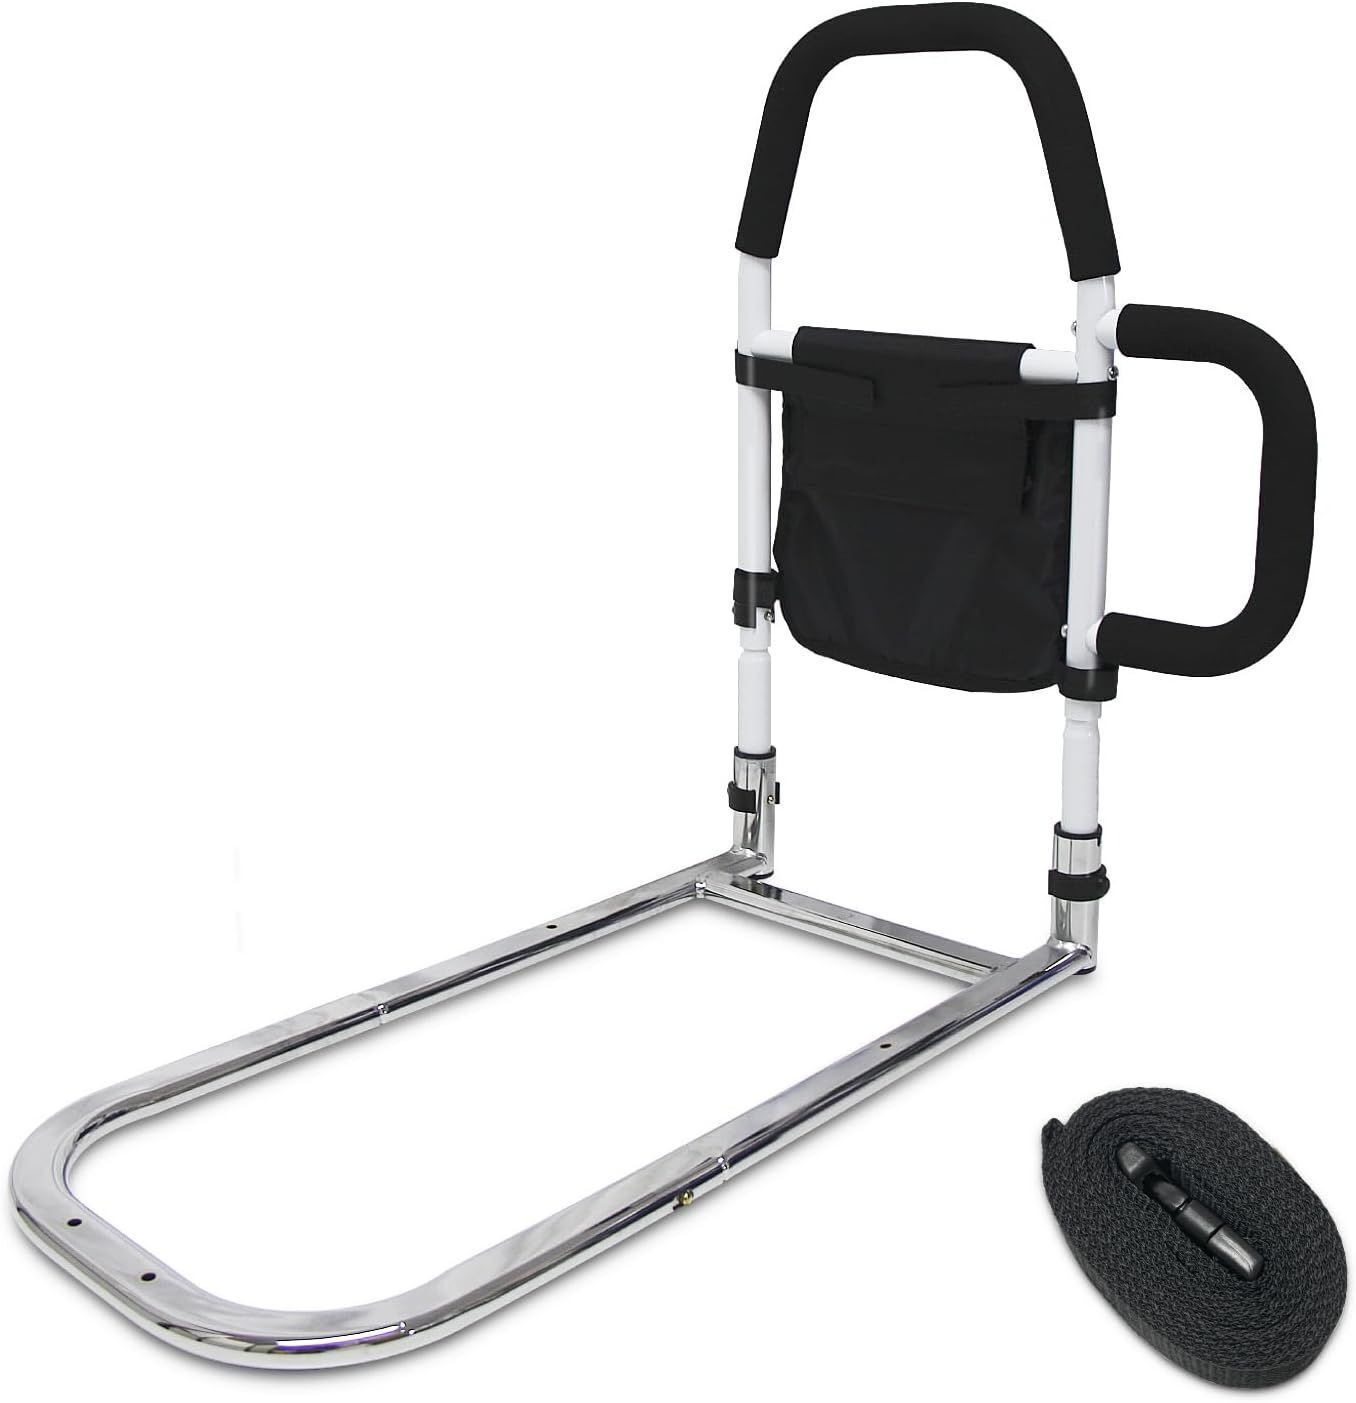 Primary image for Bed Rail For Elderly Safety Assist Bar Double Grad Bars Up To 300lbs